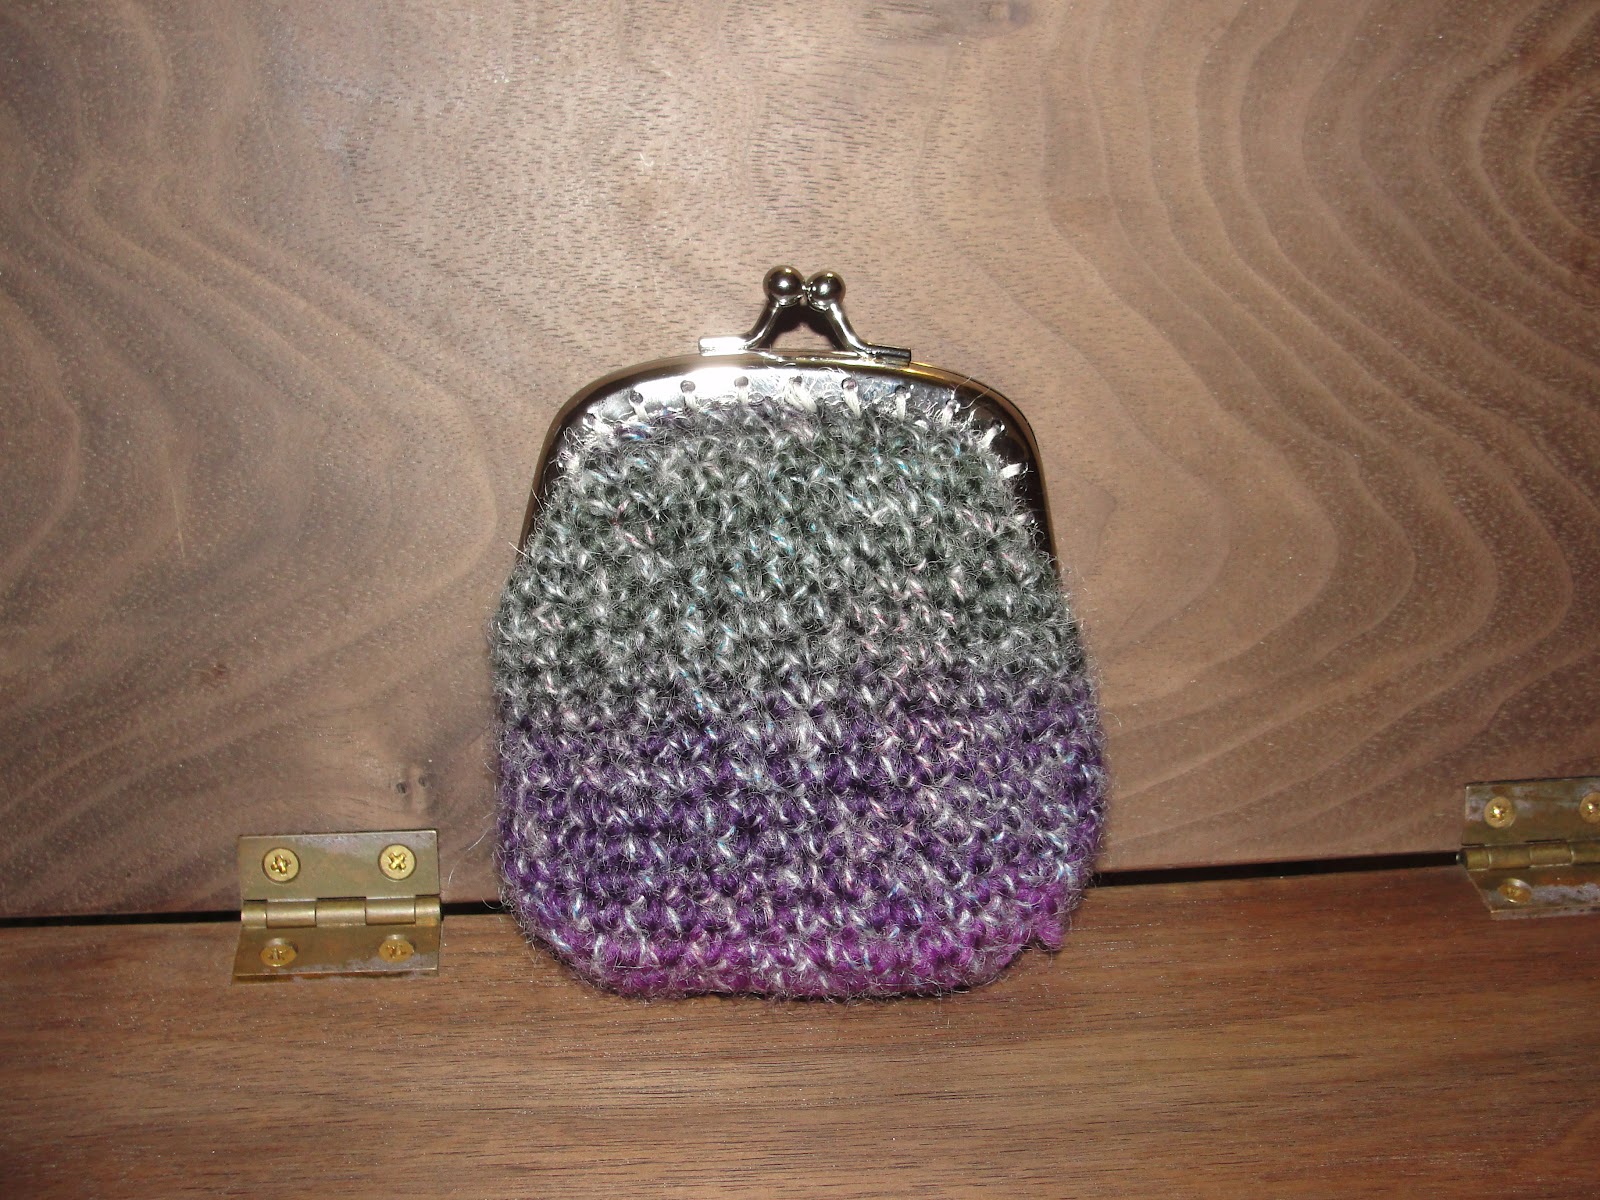 libertycrochet: Coin purse with a kiss clasp*